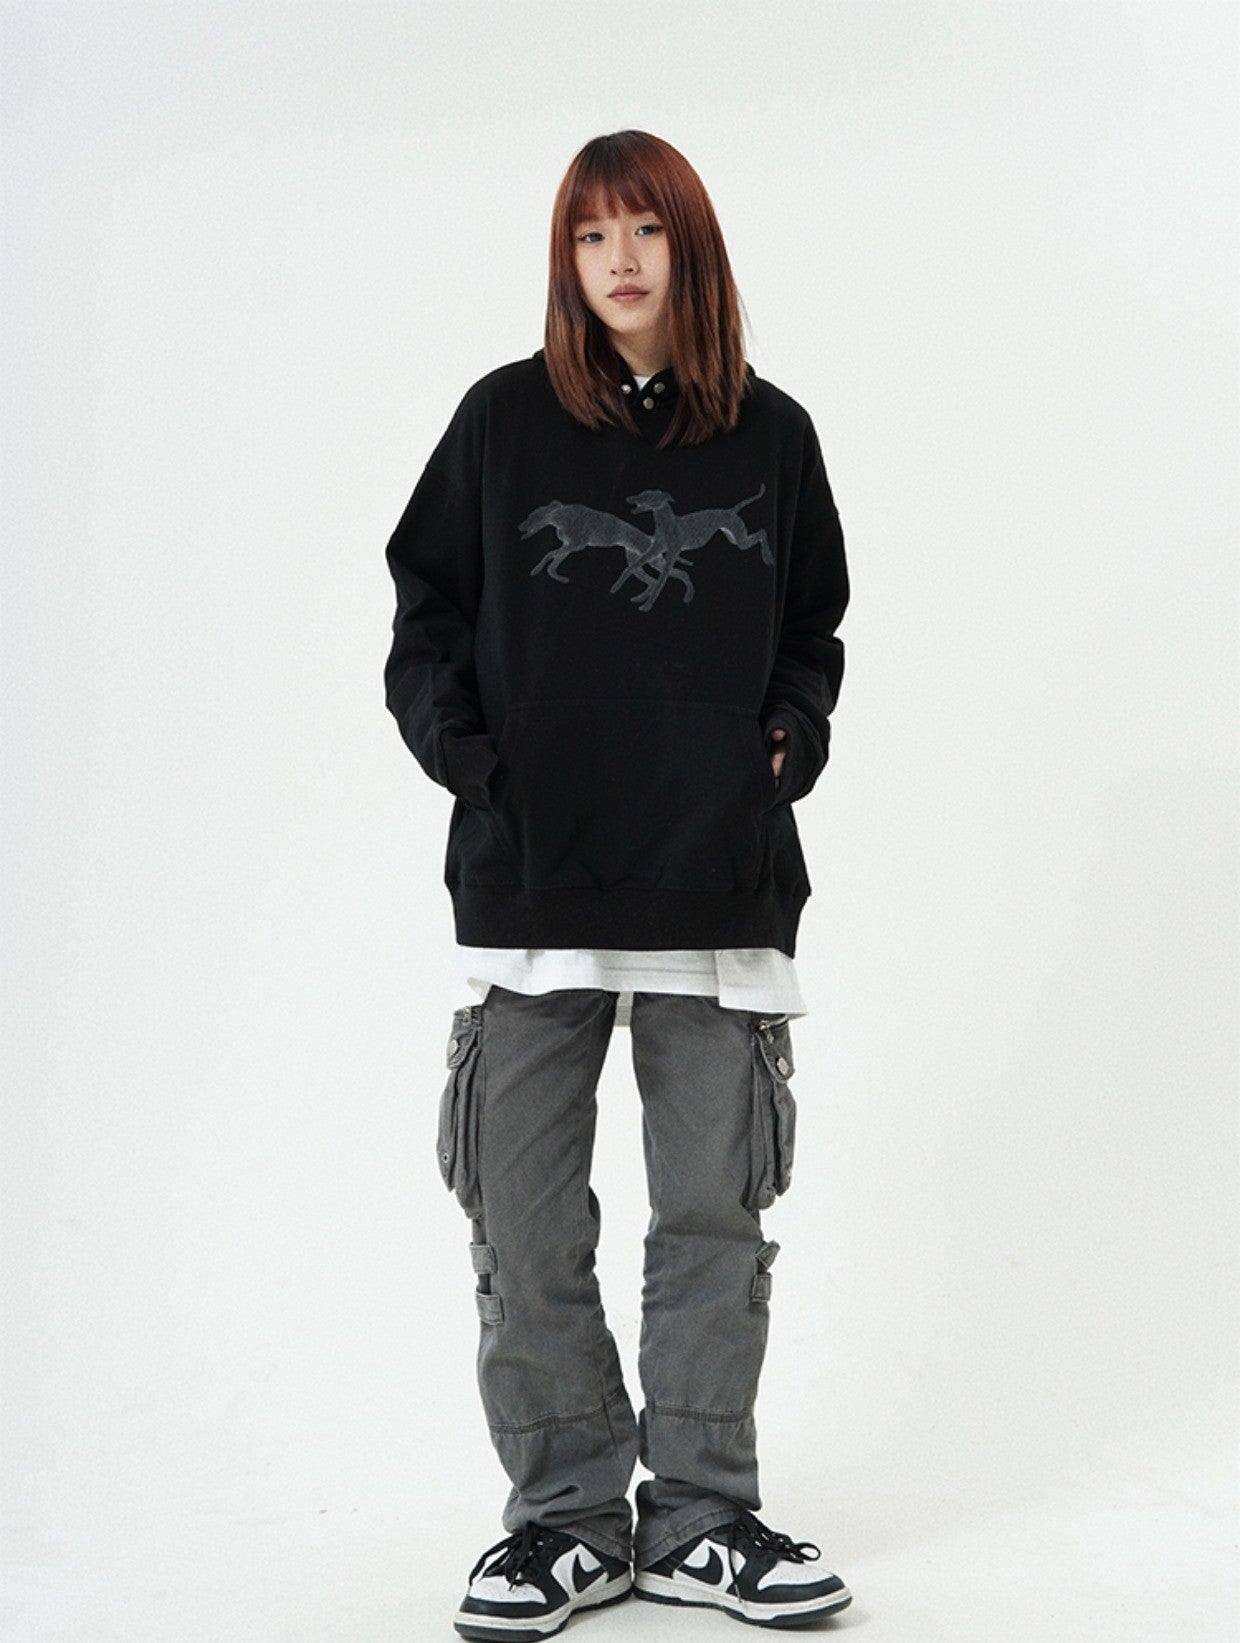 Jumping Animal Graphic Hoodie Korean Street Fashion Hoodie By Made Extreme Shop Online at OH Vault